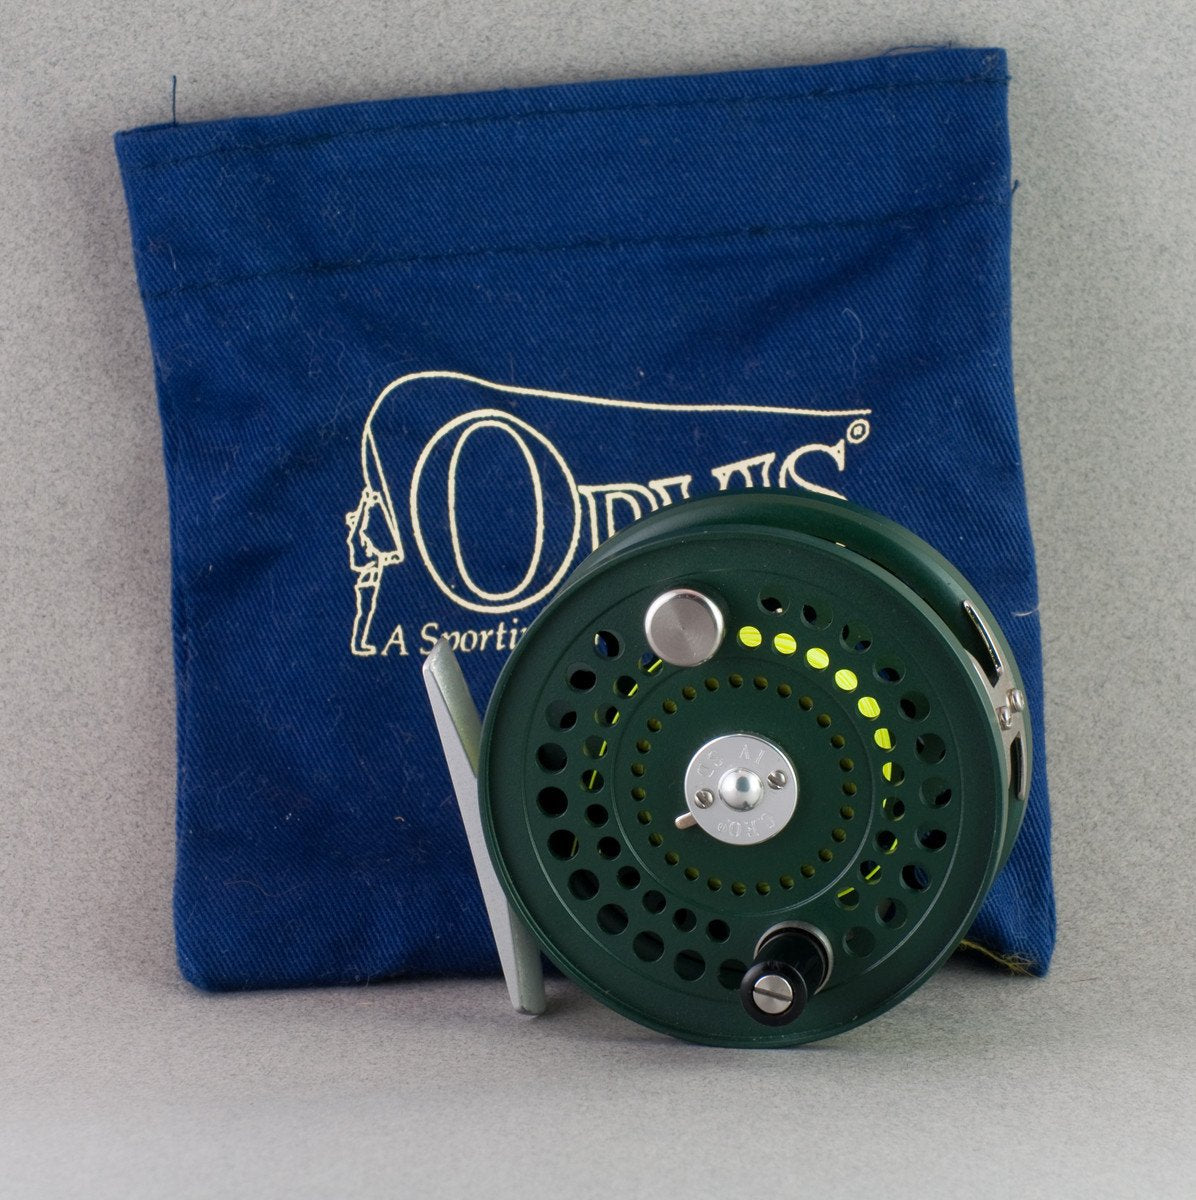 Orvis Classic Reels Page 2 - Spinoza Rod Company